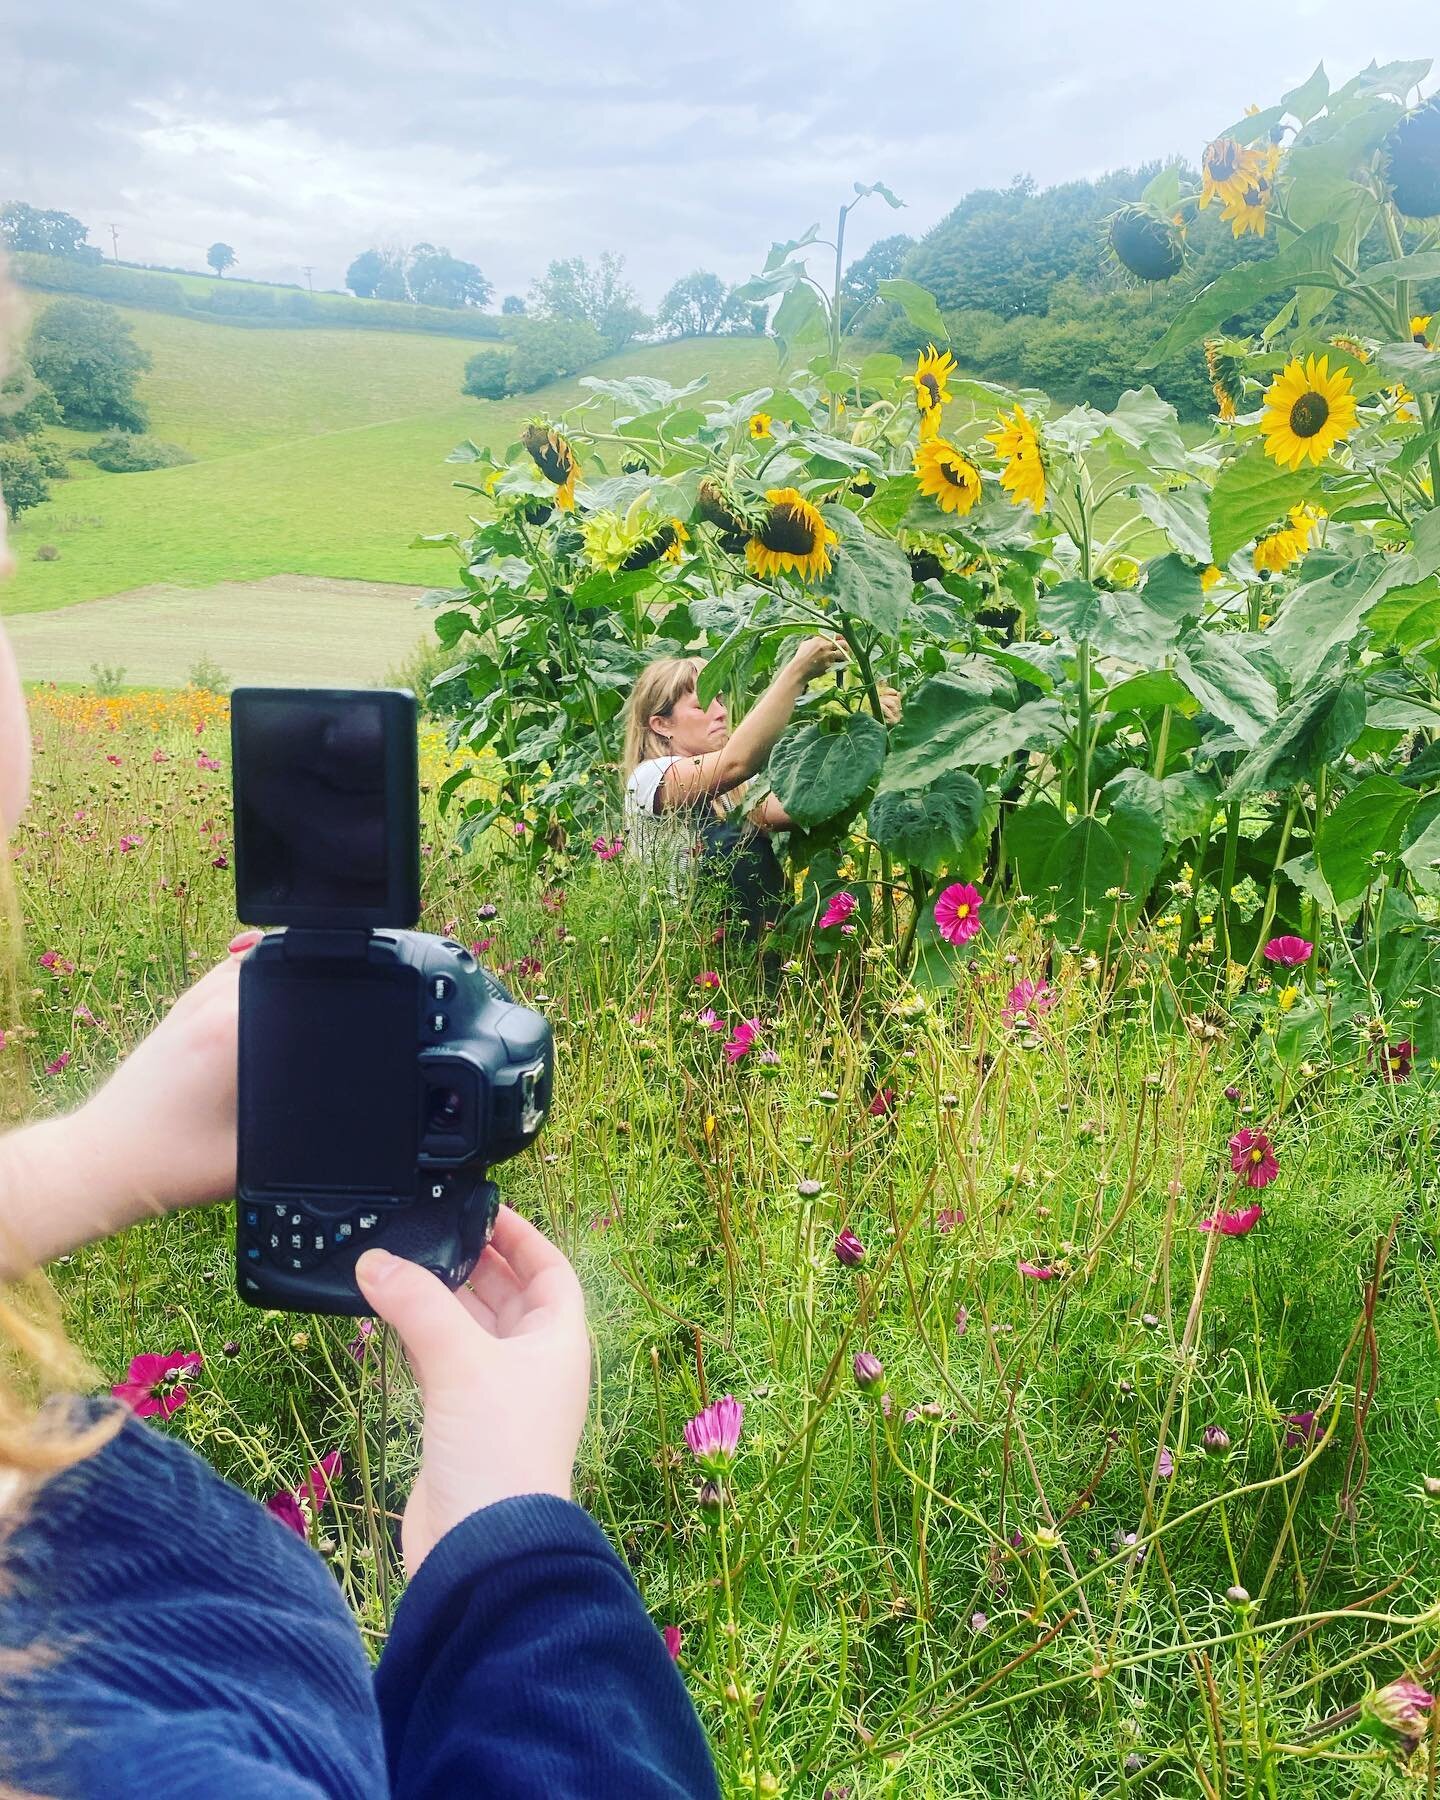 Photoshoot day&hellip;

Not long now until we have an actual website, hence the photo shoot&hellip;here is the talented Sophie from @pigmentplantdyes doing her thing for our Lottie @mynameislotts 

A big part of what the collective aspires to become 